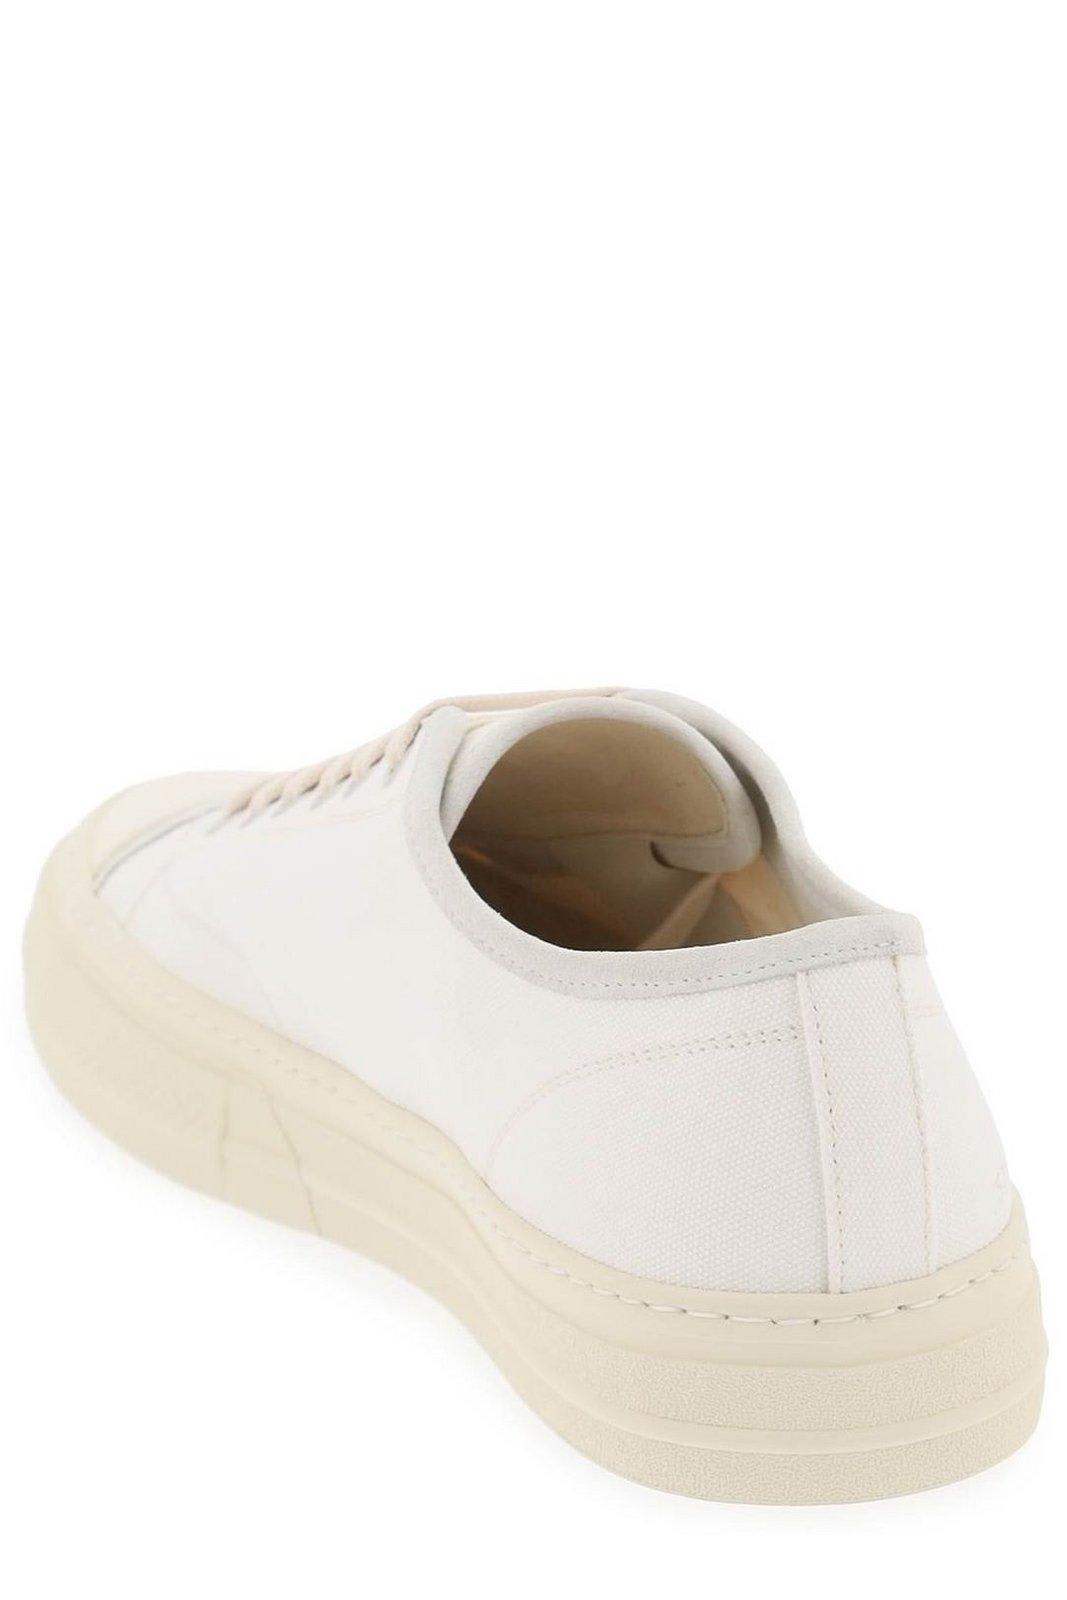 Shop Common Projects Tournament Round Toe Sneakers In Off White (white)